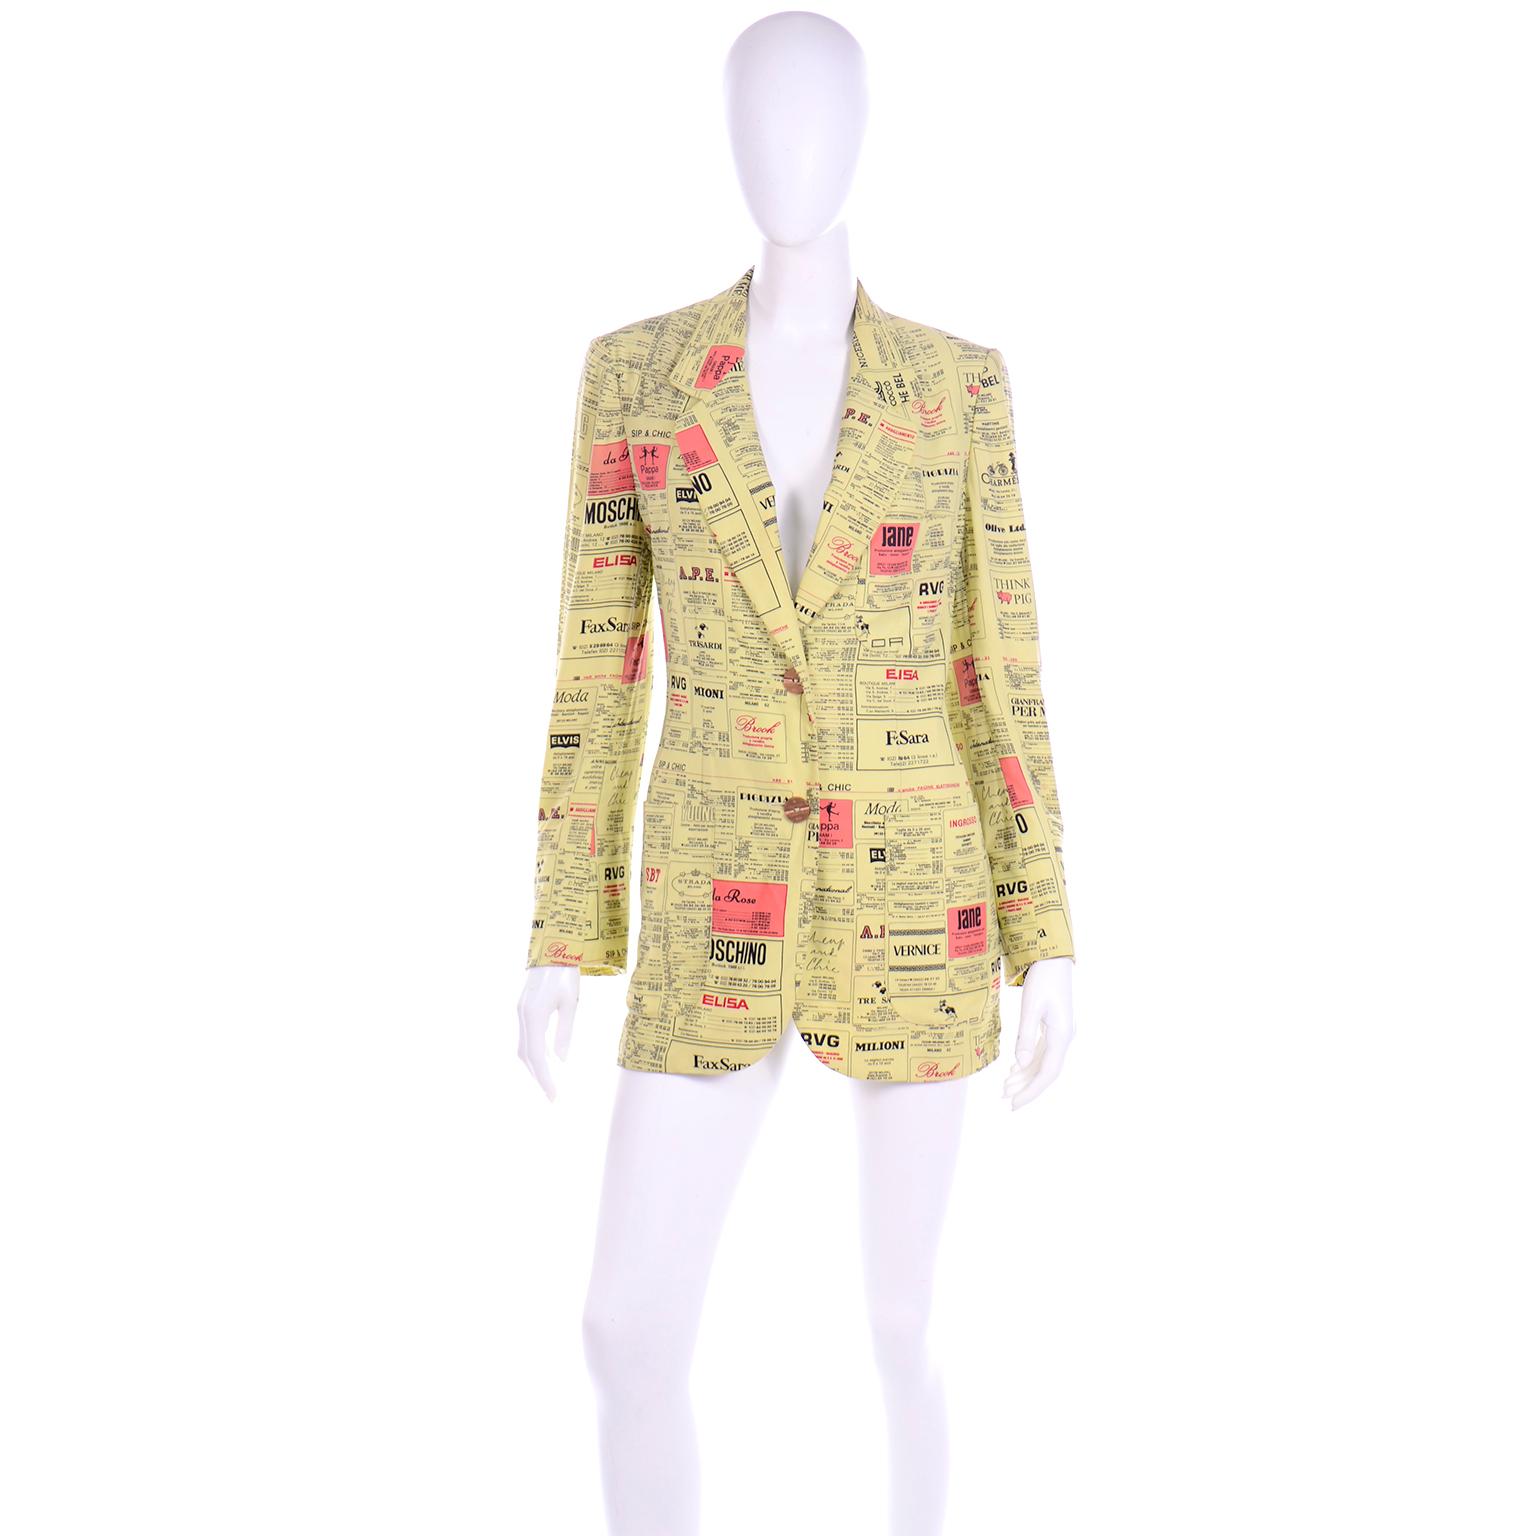 This important vintage 1990's Cheap and Chic by Moschino novelty printed blazer is one of Franco Moschino's iconic designs! The yellow pages print spoofs designer labels by giving them different names.. Chanel is Cocco Che Bel, Hermes is Charmes,